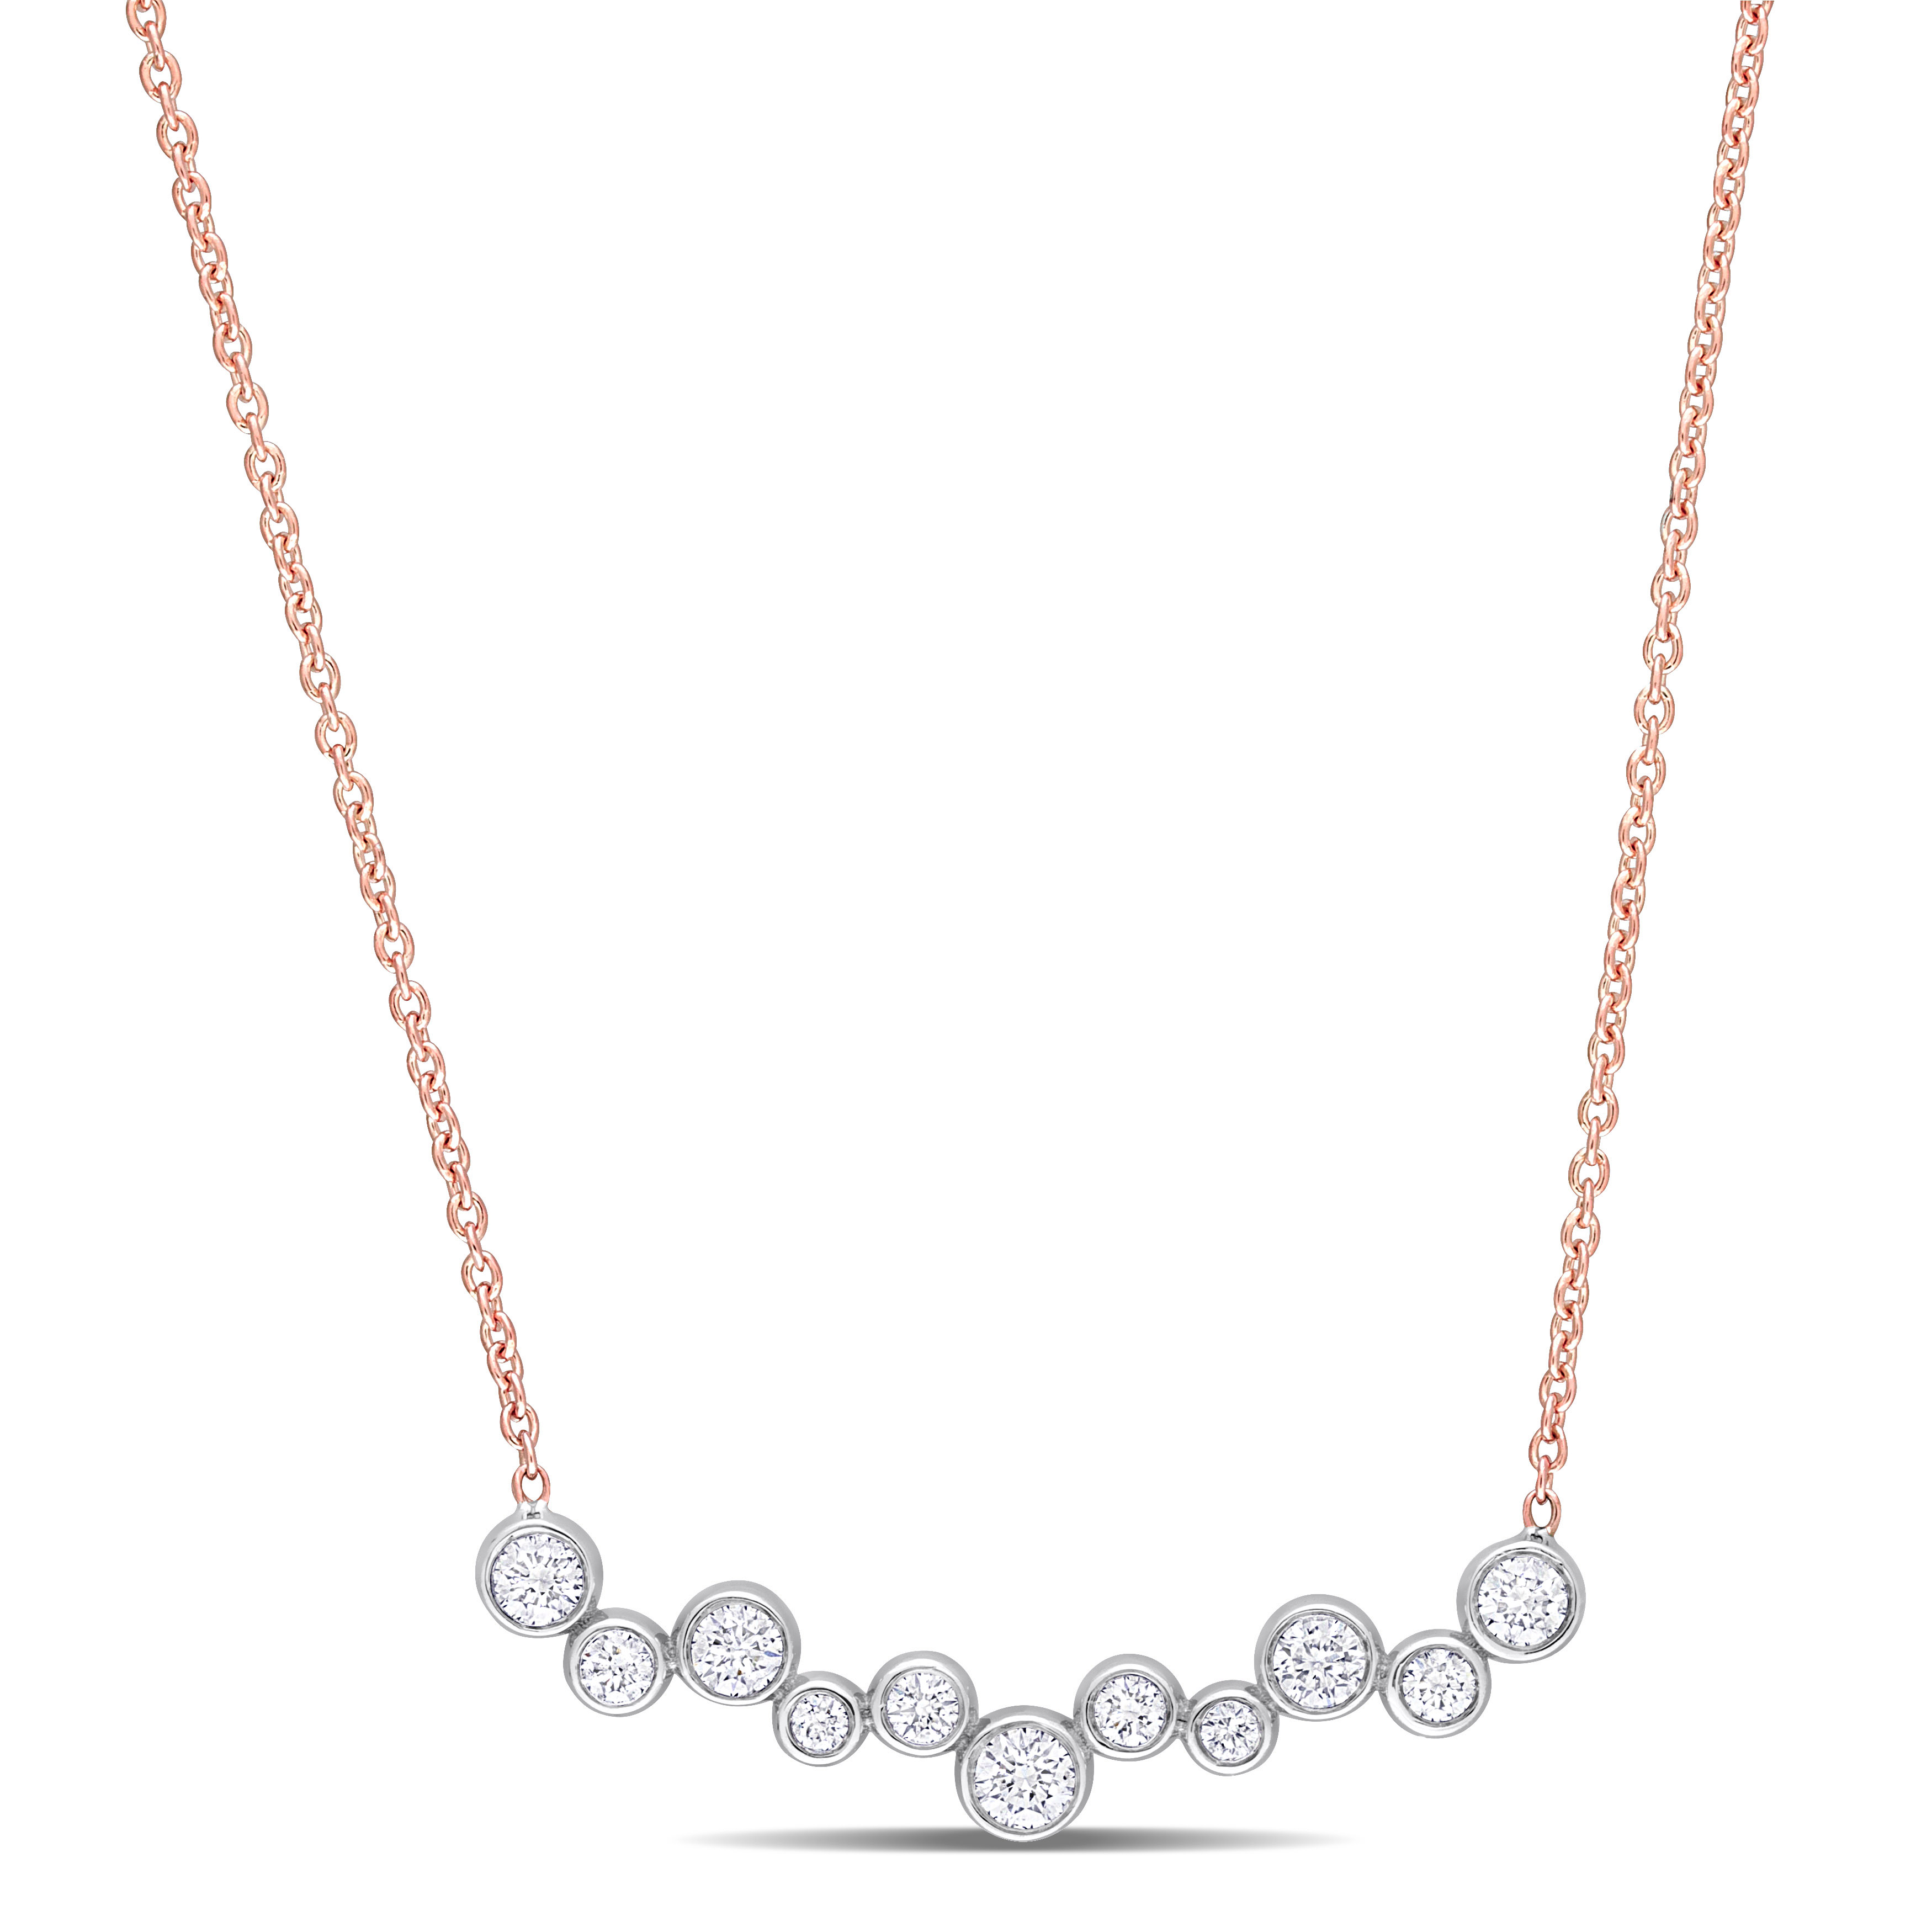 2/5 CT TDW Diamond Bar Necklace in 14k Two-Tone White and Rose Gold - 17 in.